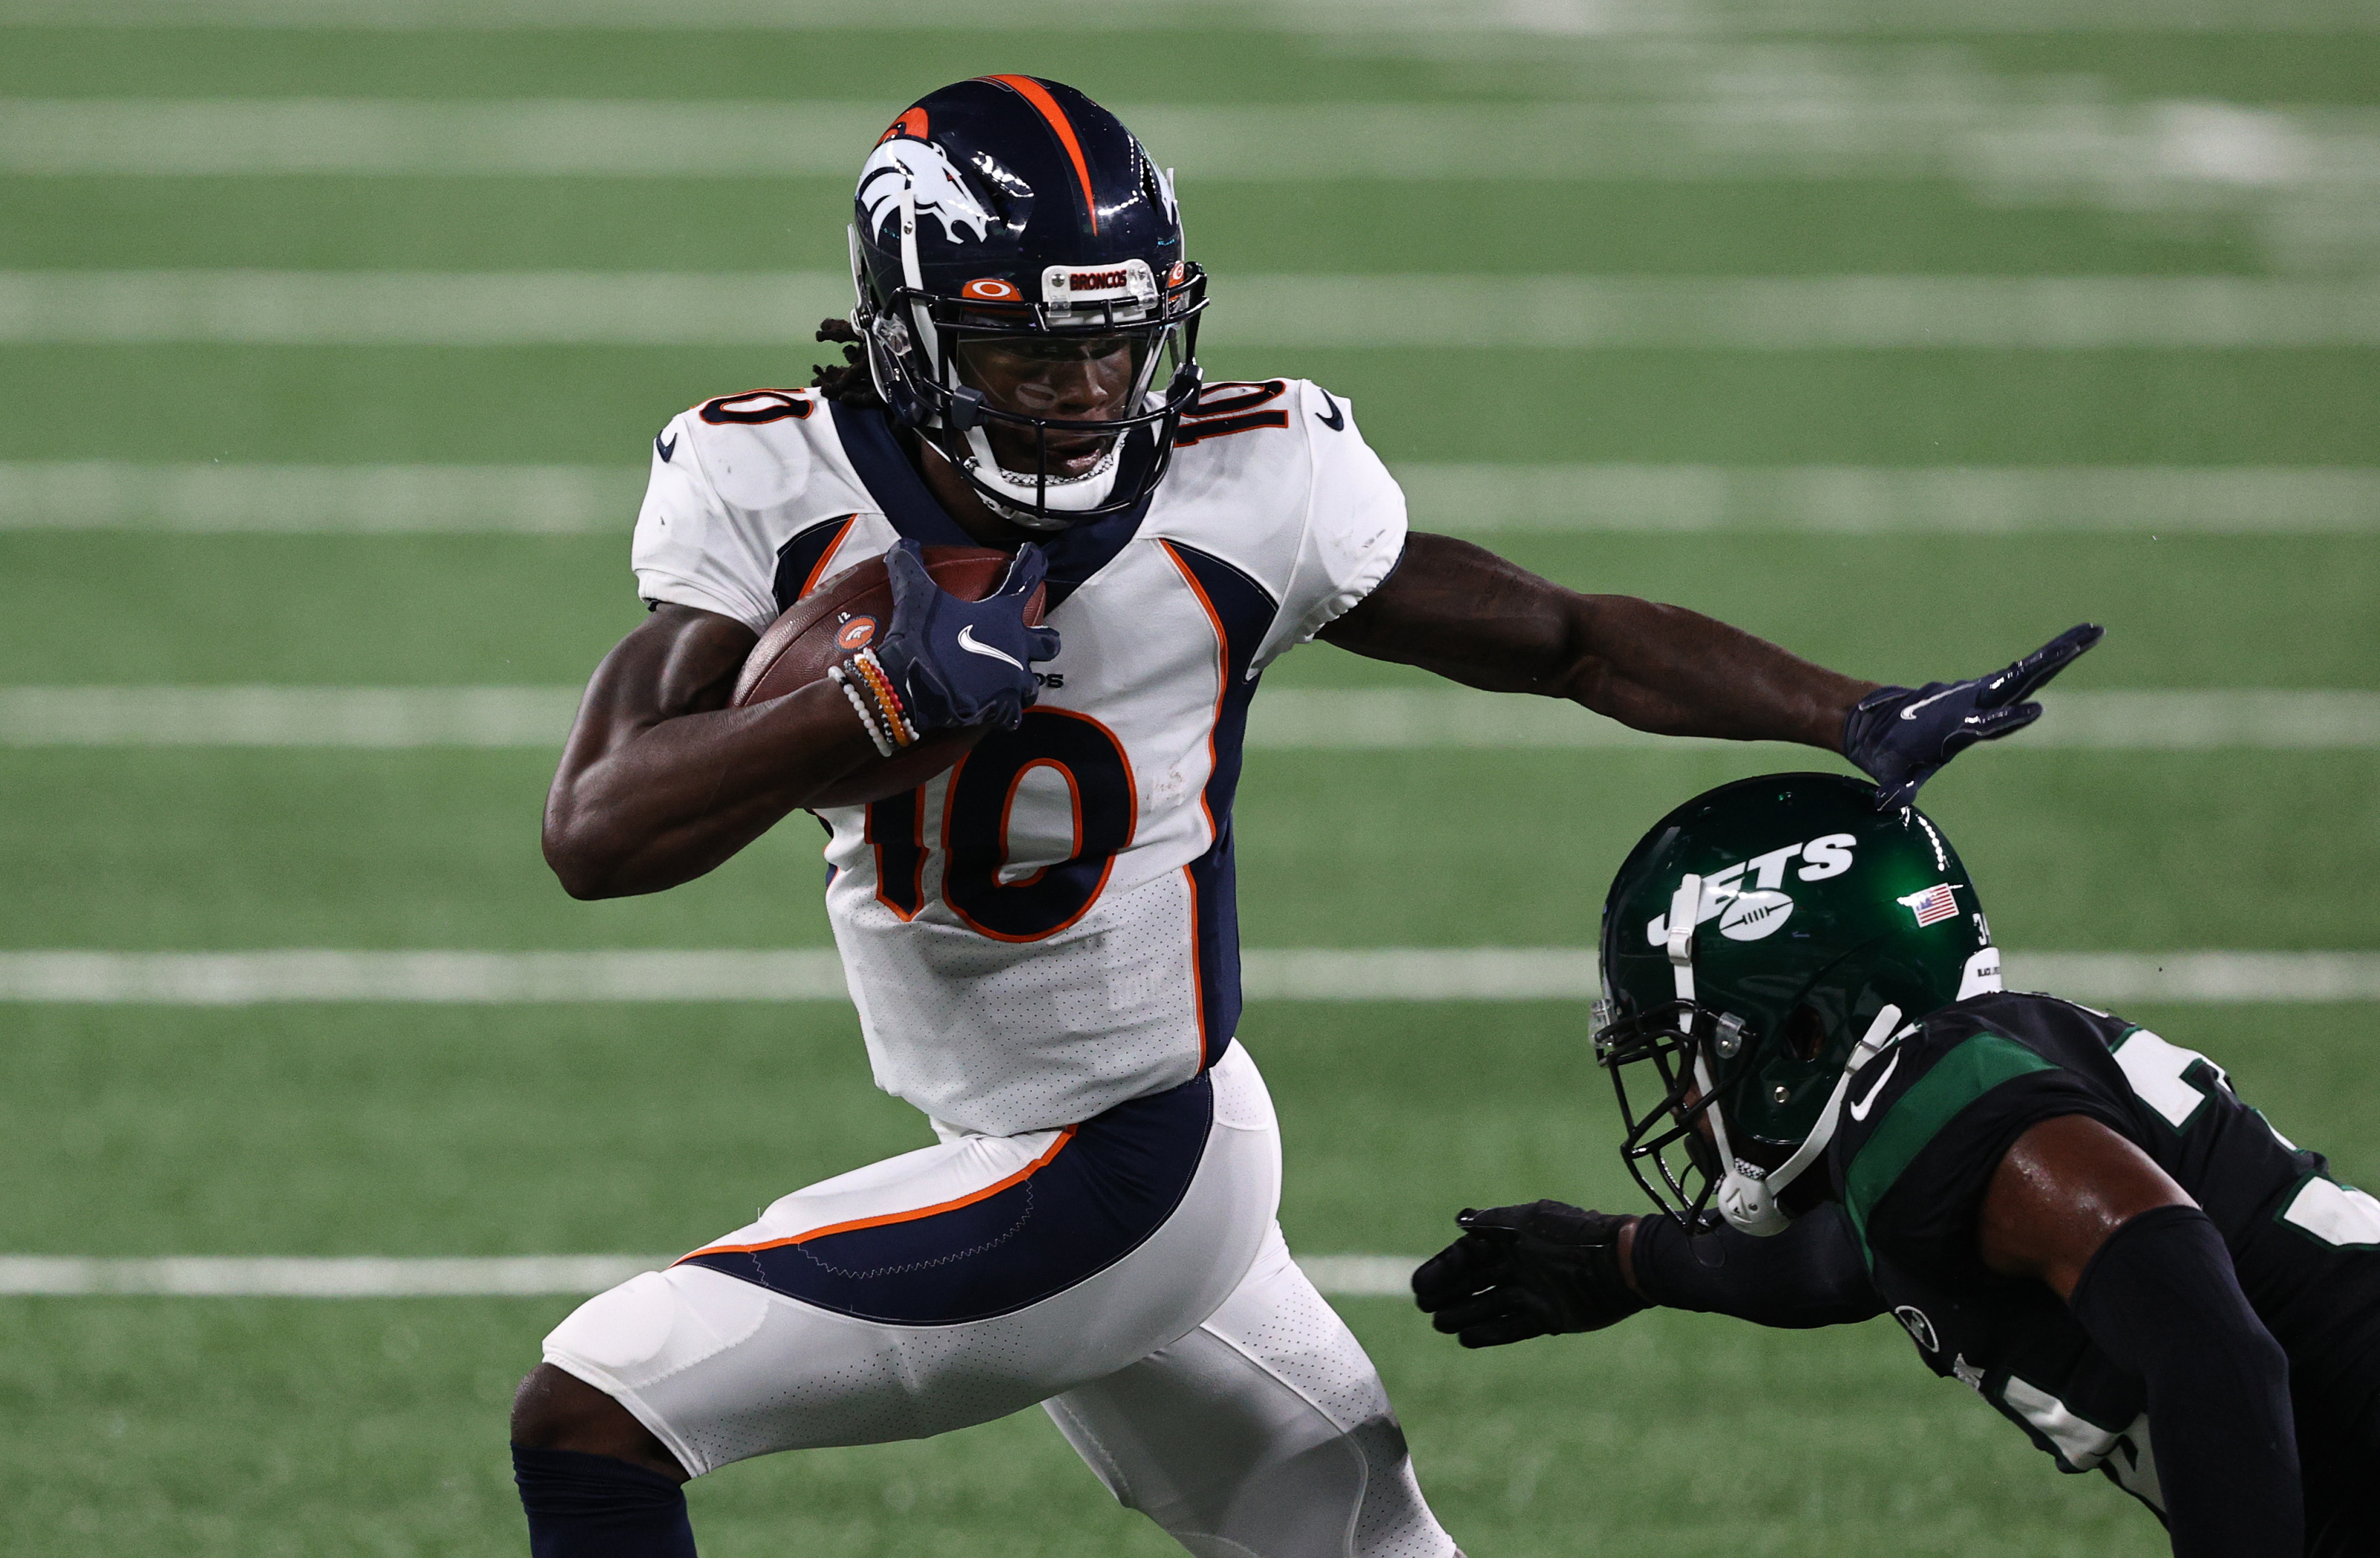 5 NFL wide receivers who could break out in the 2021 season